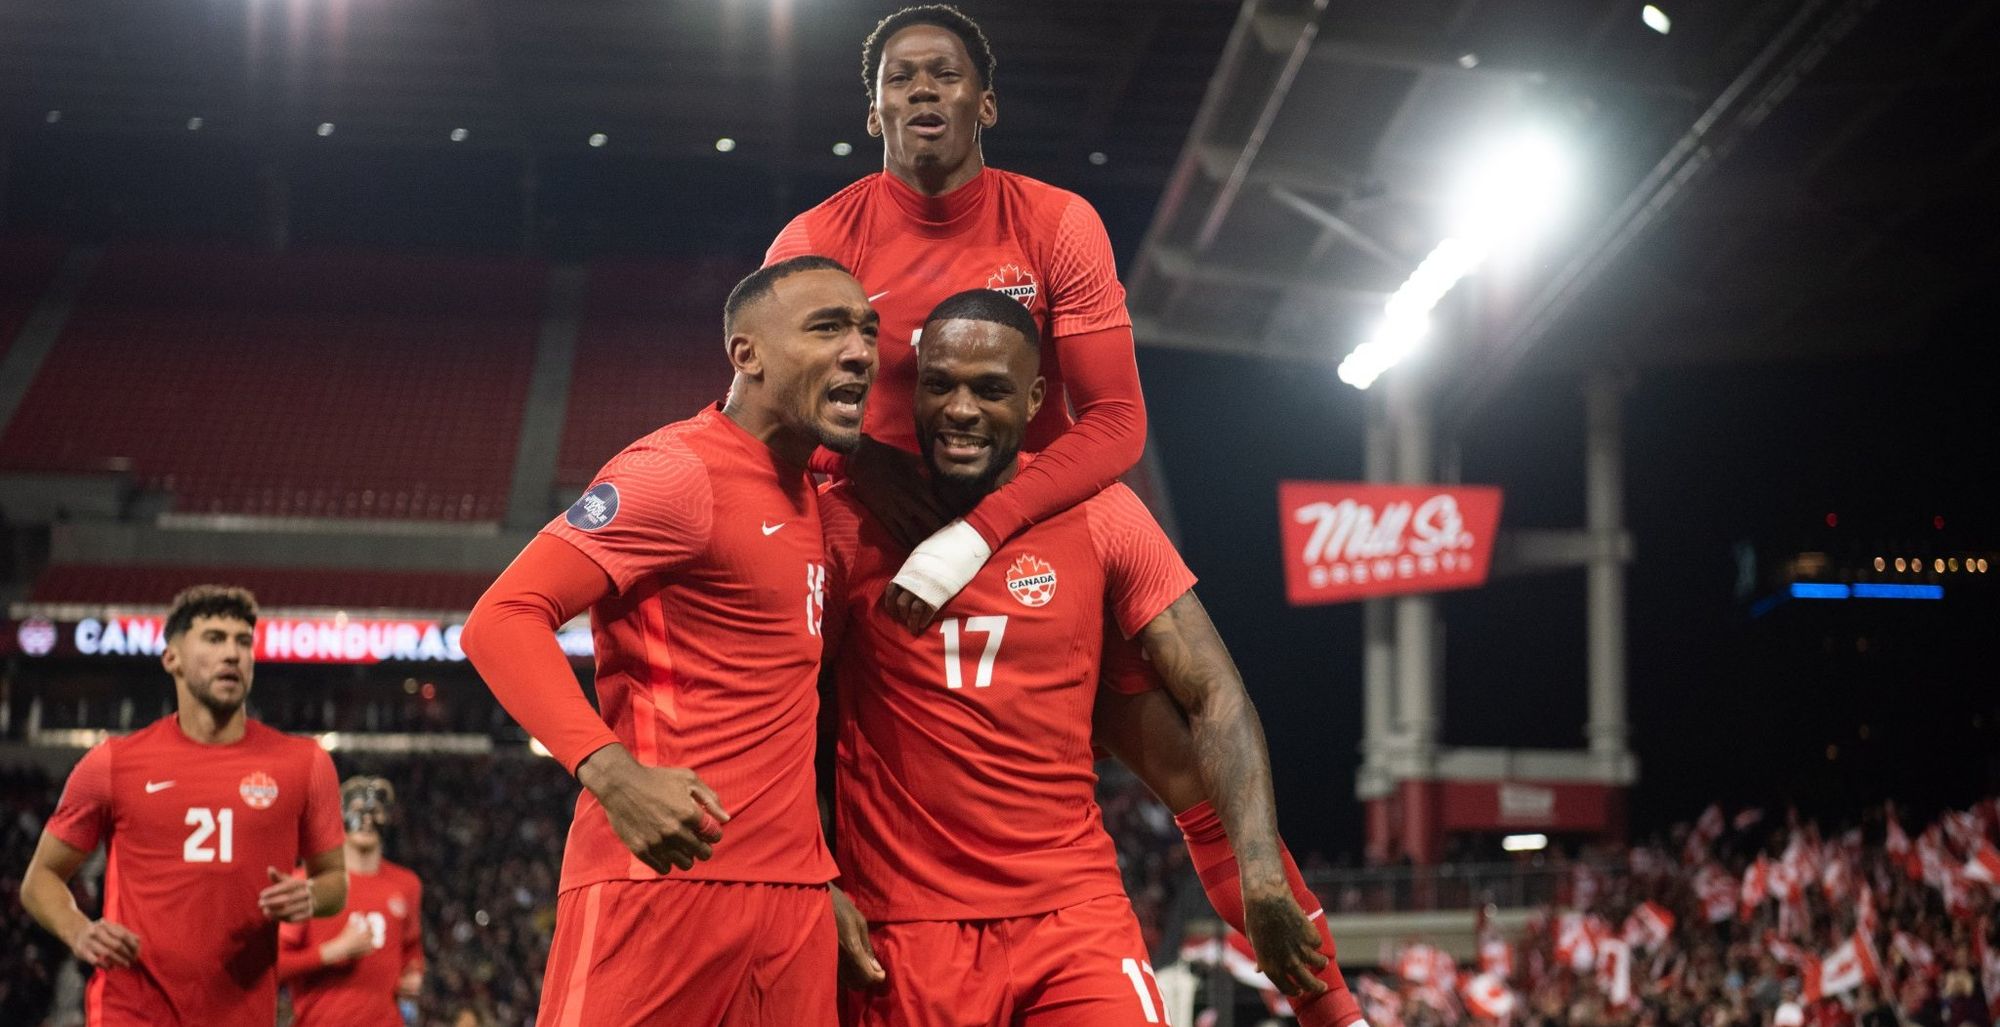 Canada beats up Honduras to qualify for Concacaf Nations League finals